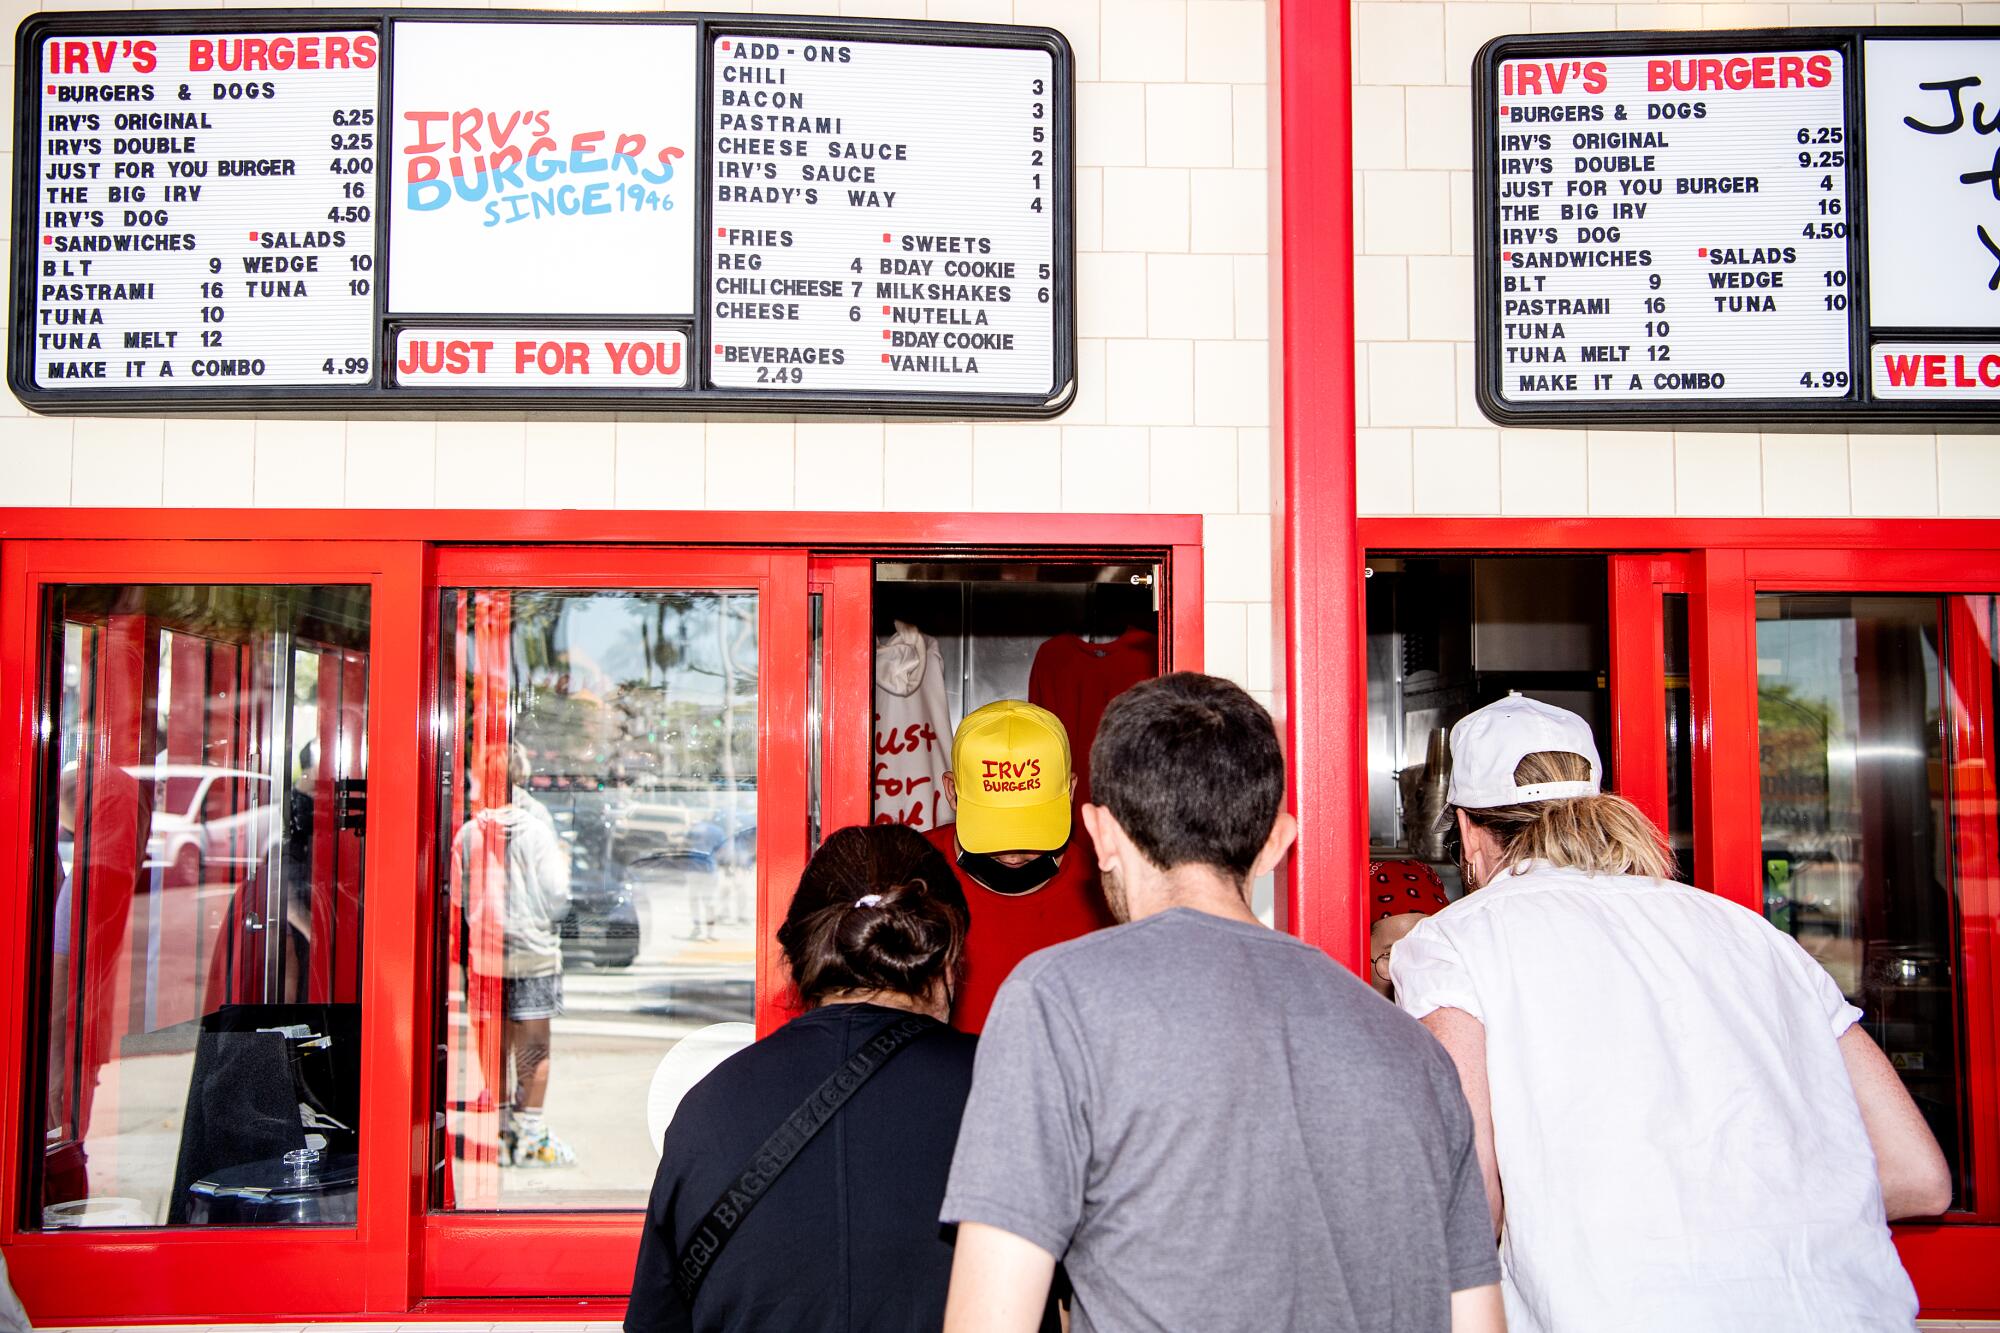 A trio of customers stands at the Irv's Burgers order window, their backs to the camera.